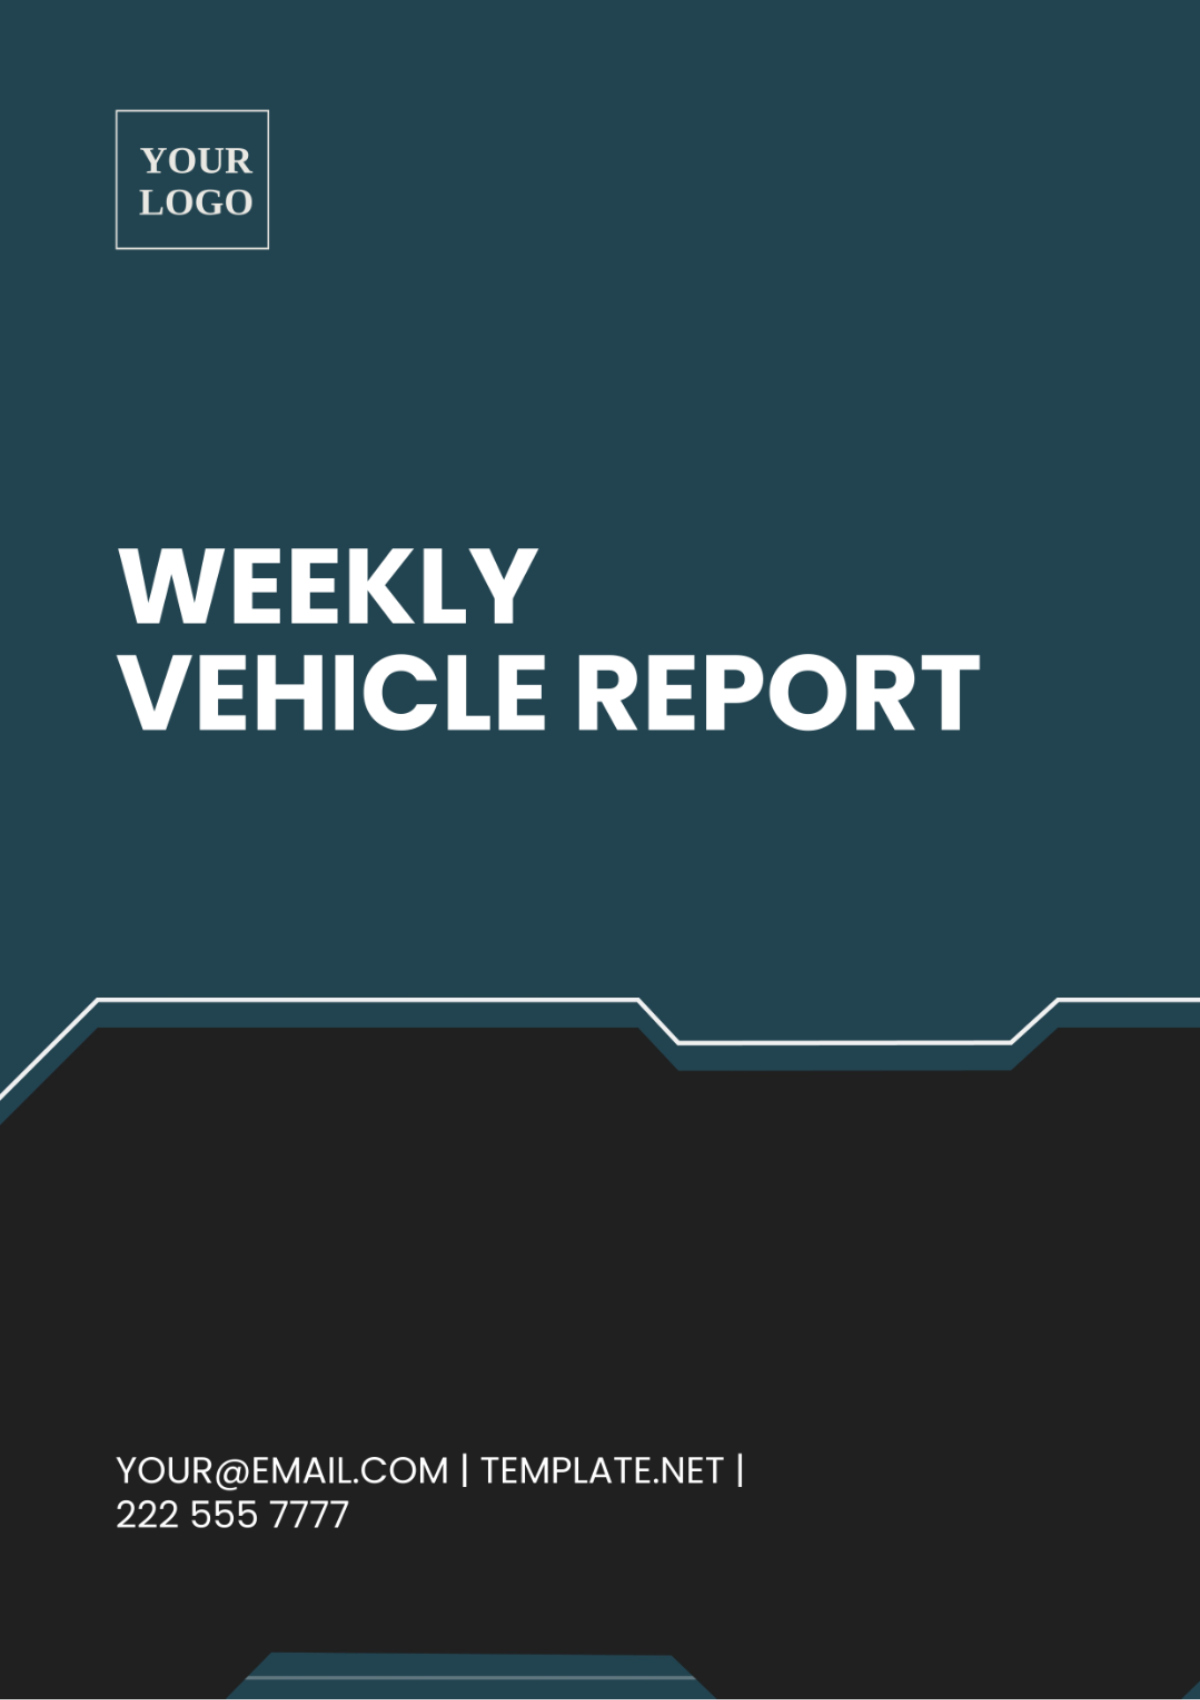 Weekly Vehicle Report Template